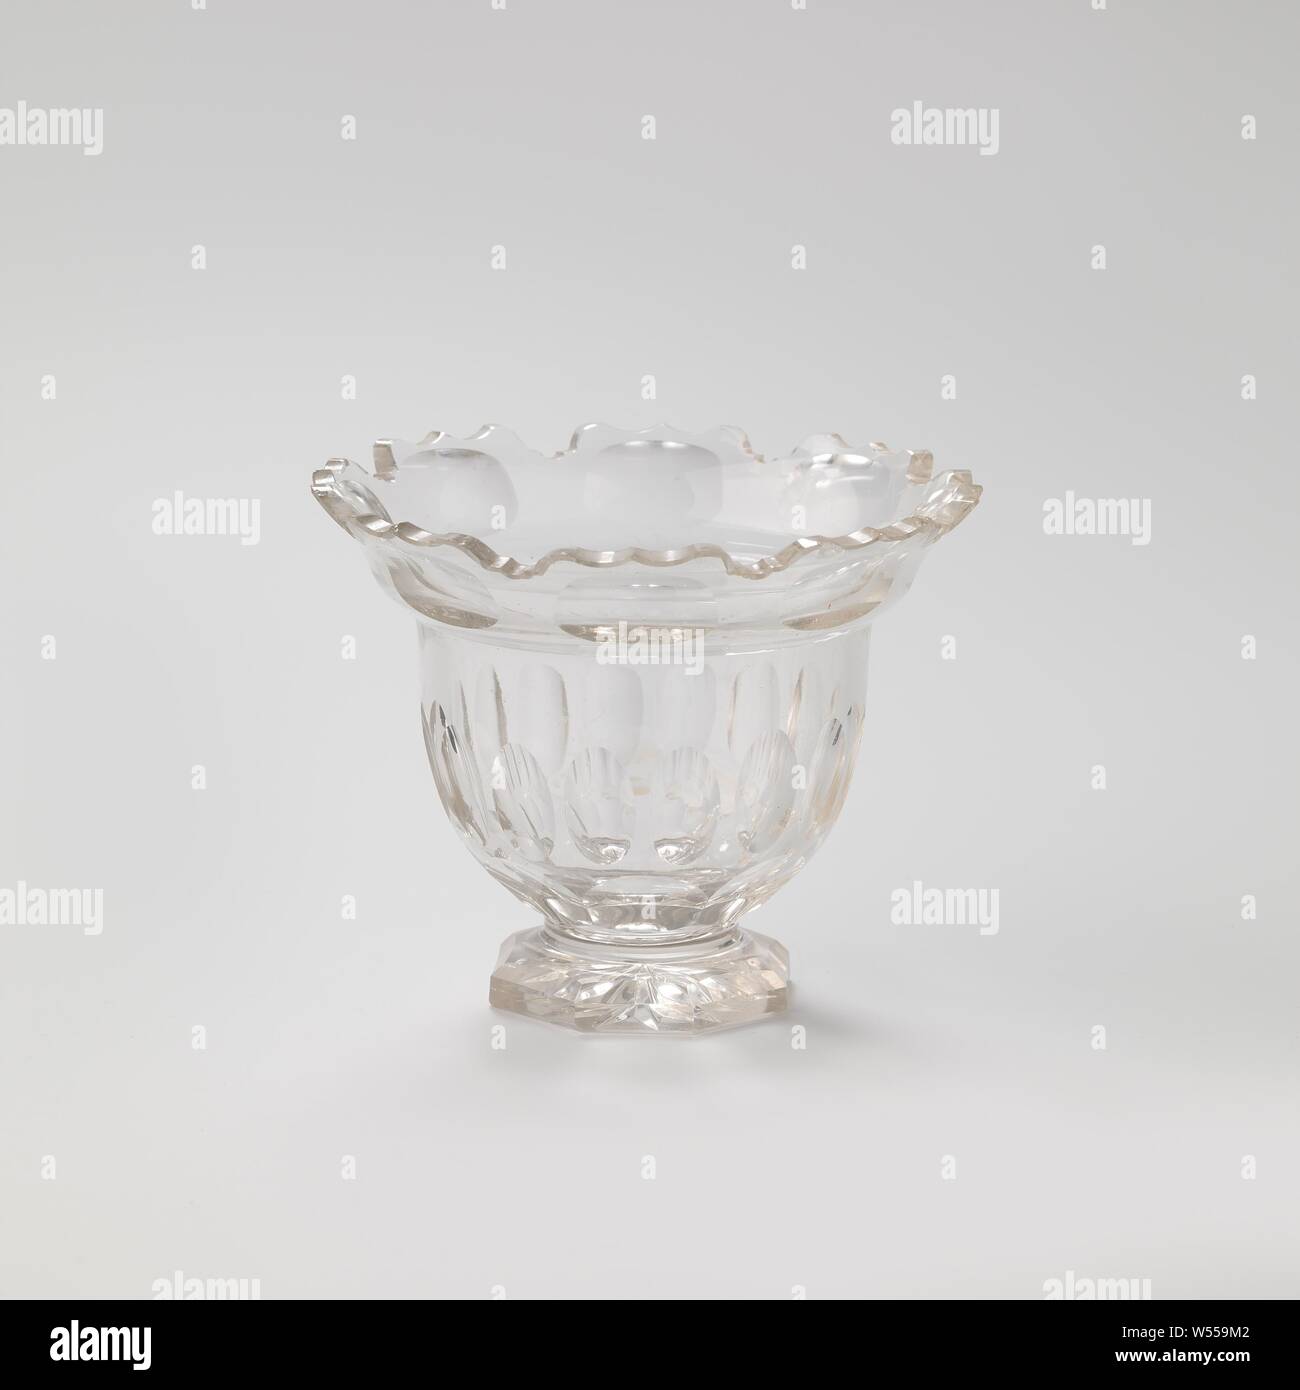 Sugar bowl made of cut crystal on octagonal base, Round sugar bowl made of cut crystal. The pot rests on an octagonal base. The bulbous vessel has a sloping, scalloped top edge., anonymous, Netherlands (possibly), c. 1881, crystal (lead glass), h 10 cm × d 11 cm Stock Photo